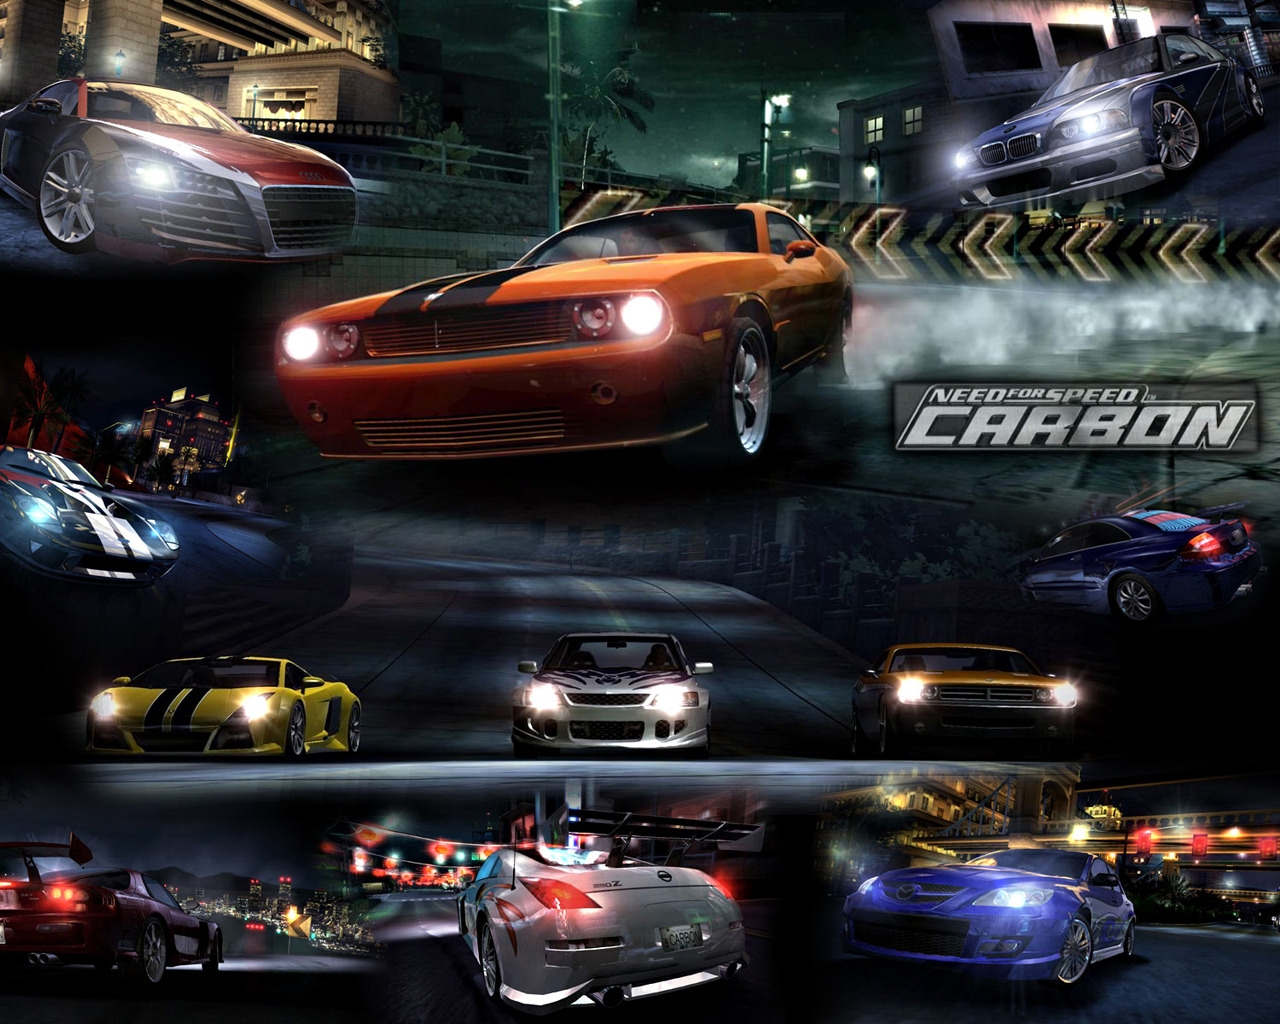 NFS Carbon for 1280 x 1024 resolution